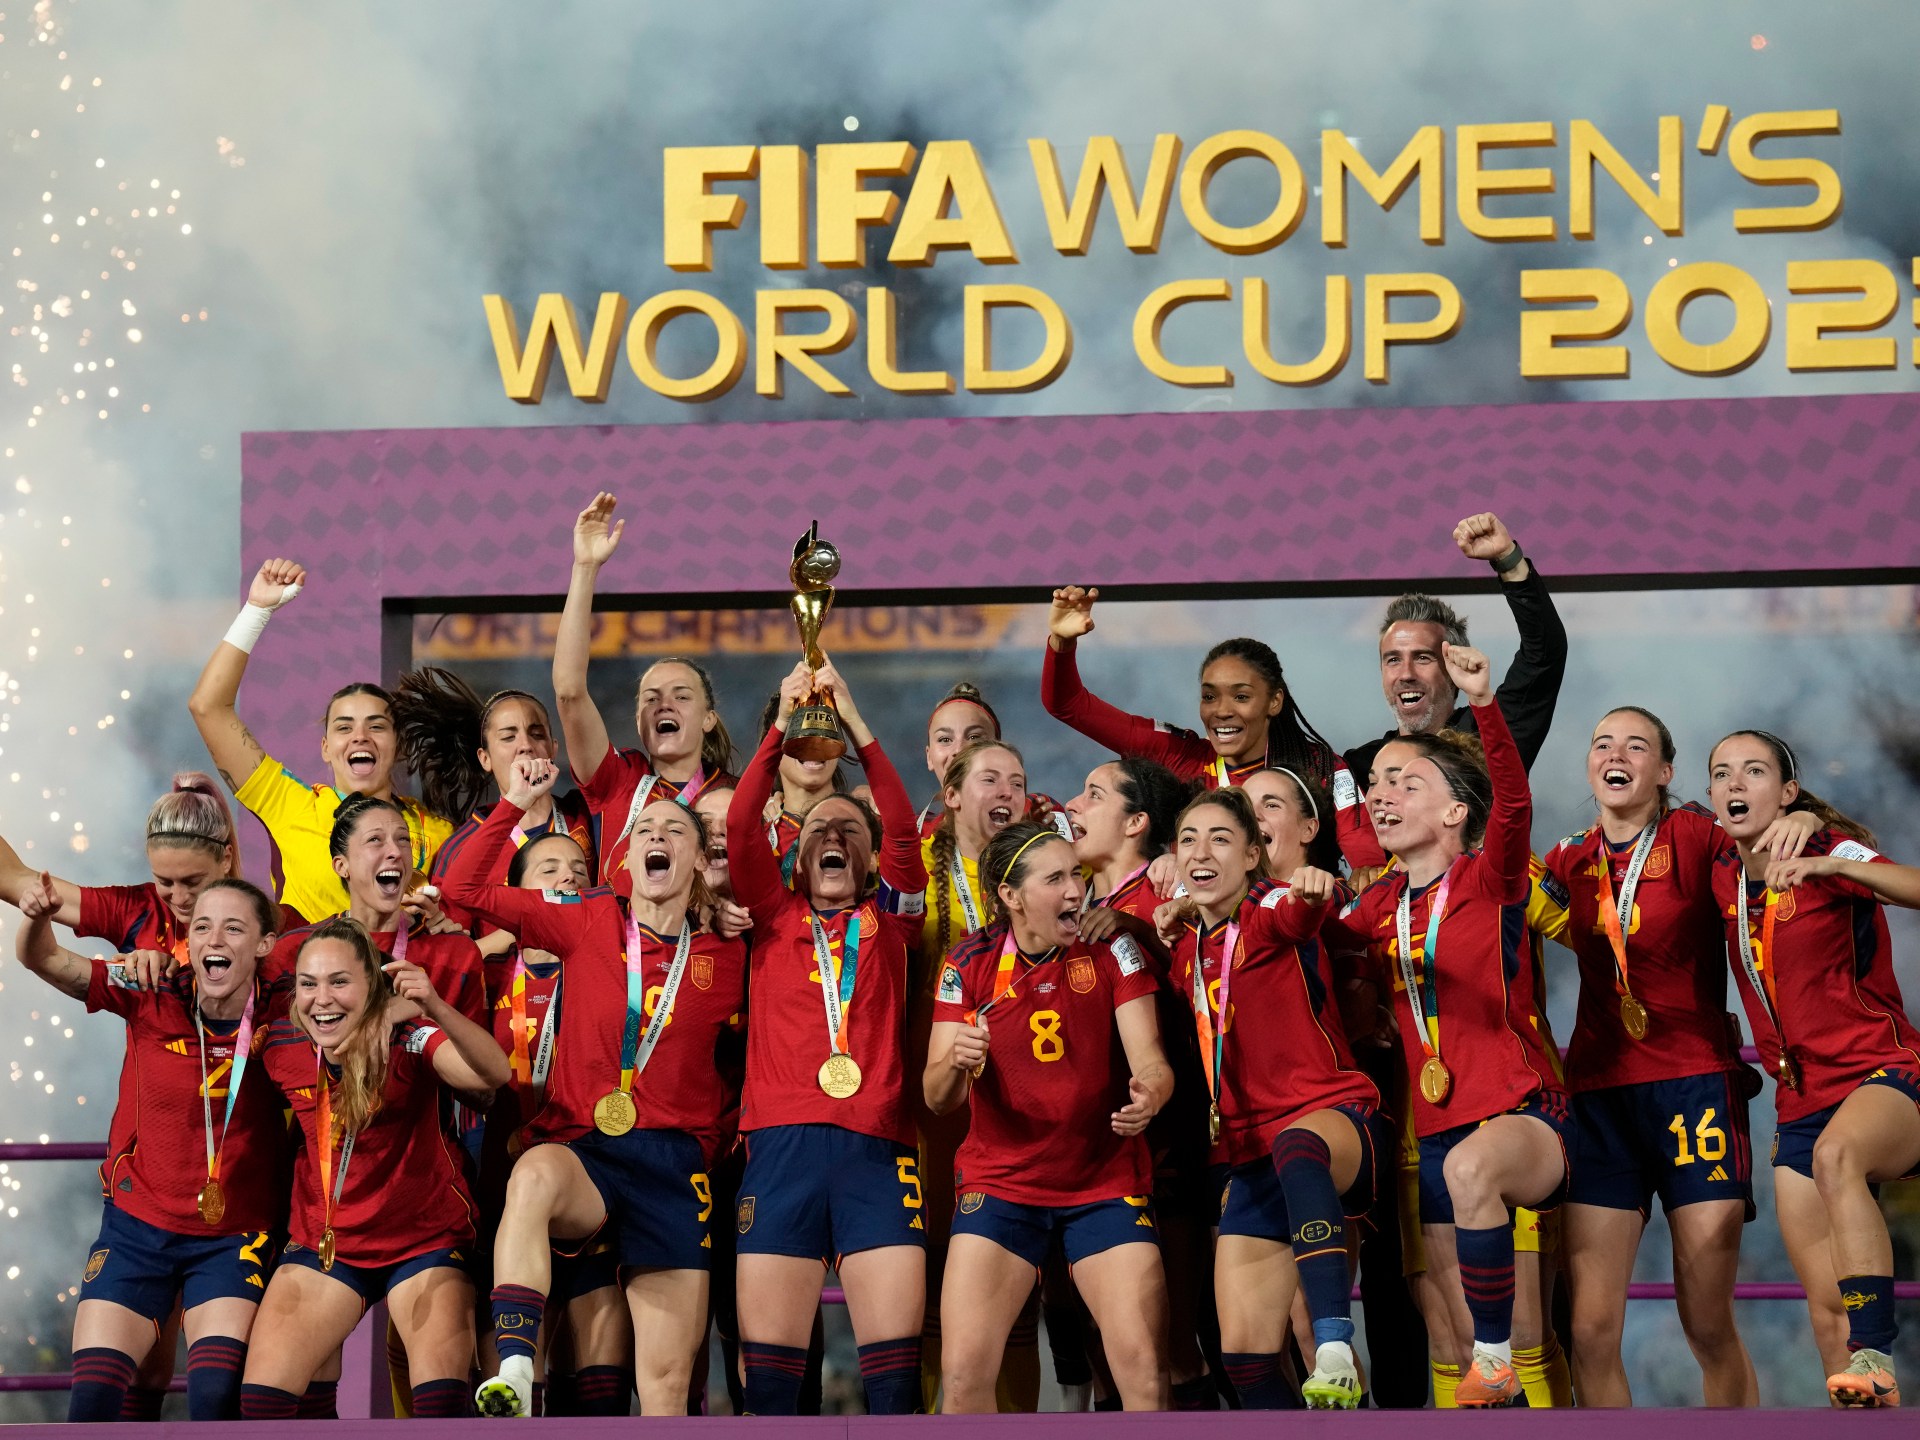 United States and Mexico launch joint bid for 2027 Women’s World Cup | Women’s World Cup News